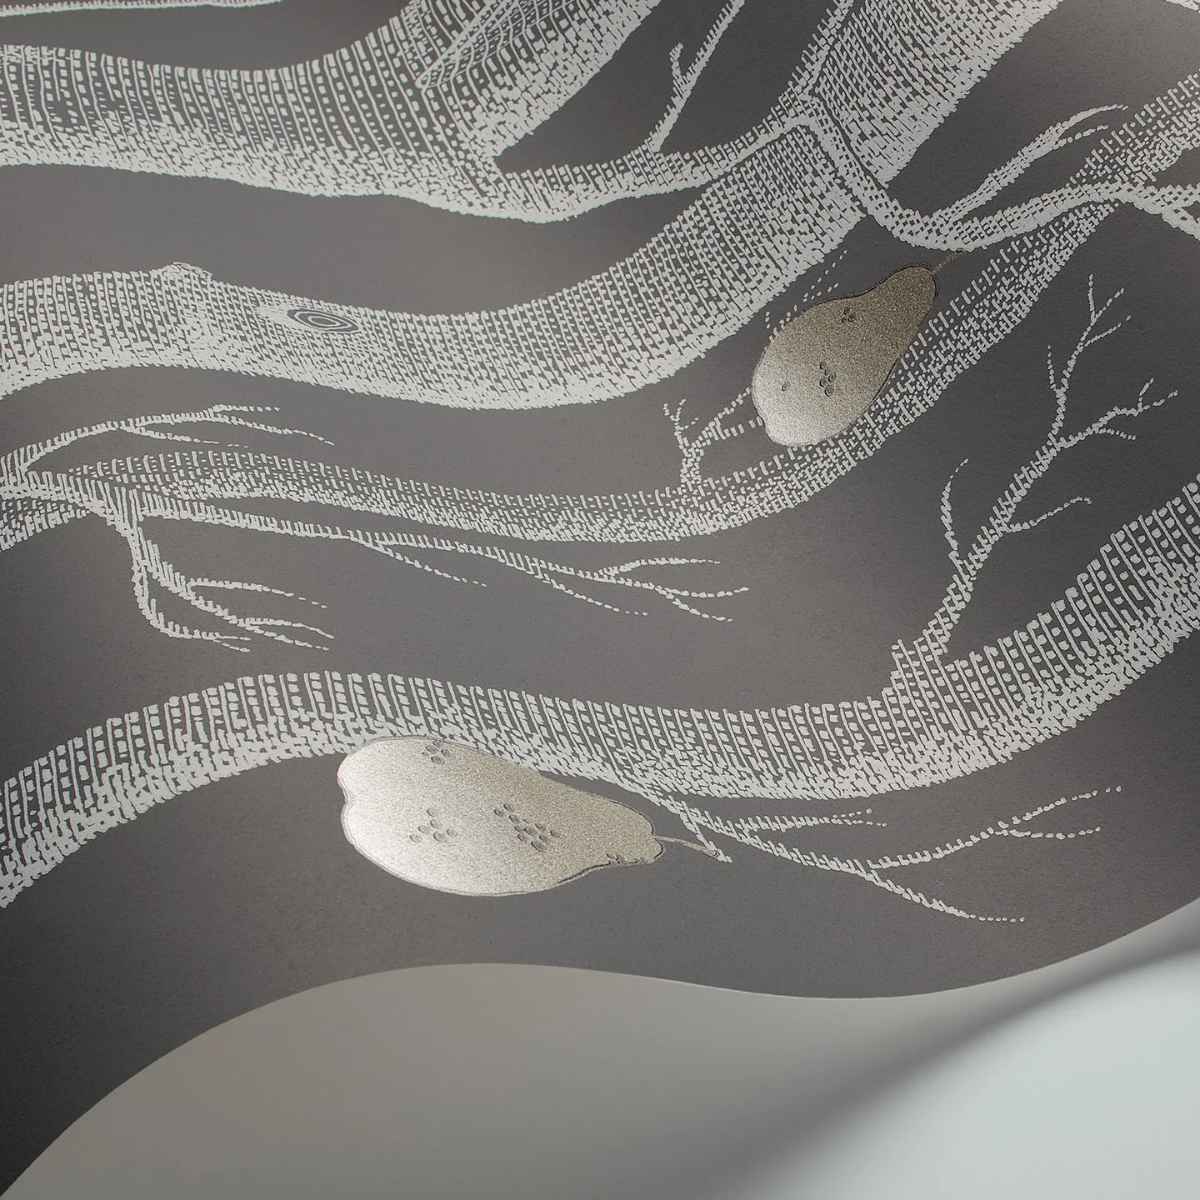 Cole &amp; Son &#39;Woods and Pears - White &amp; Metallic Silver on Charcoal&#39; Wallpaper